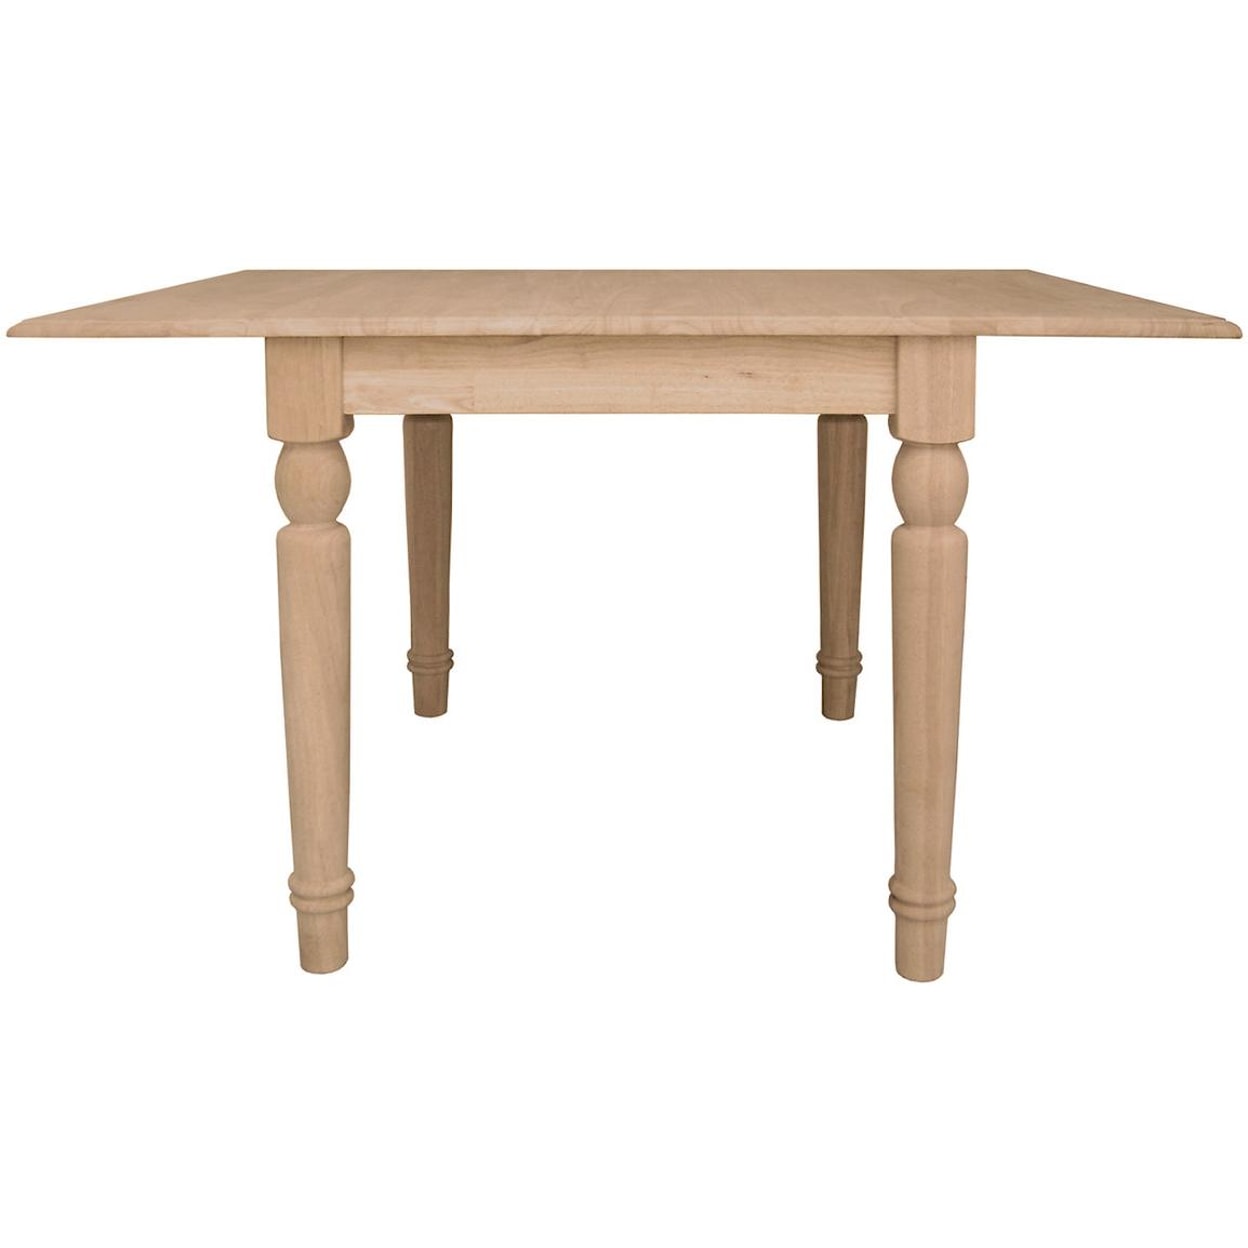 John Thomas SELECT Dining Room Double Dropleaf Table